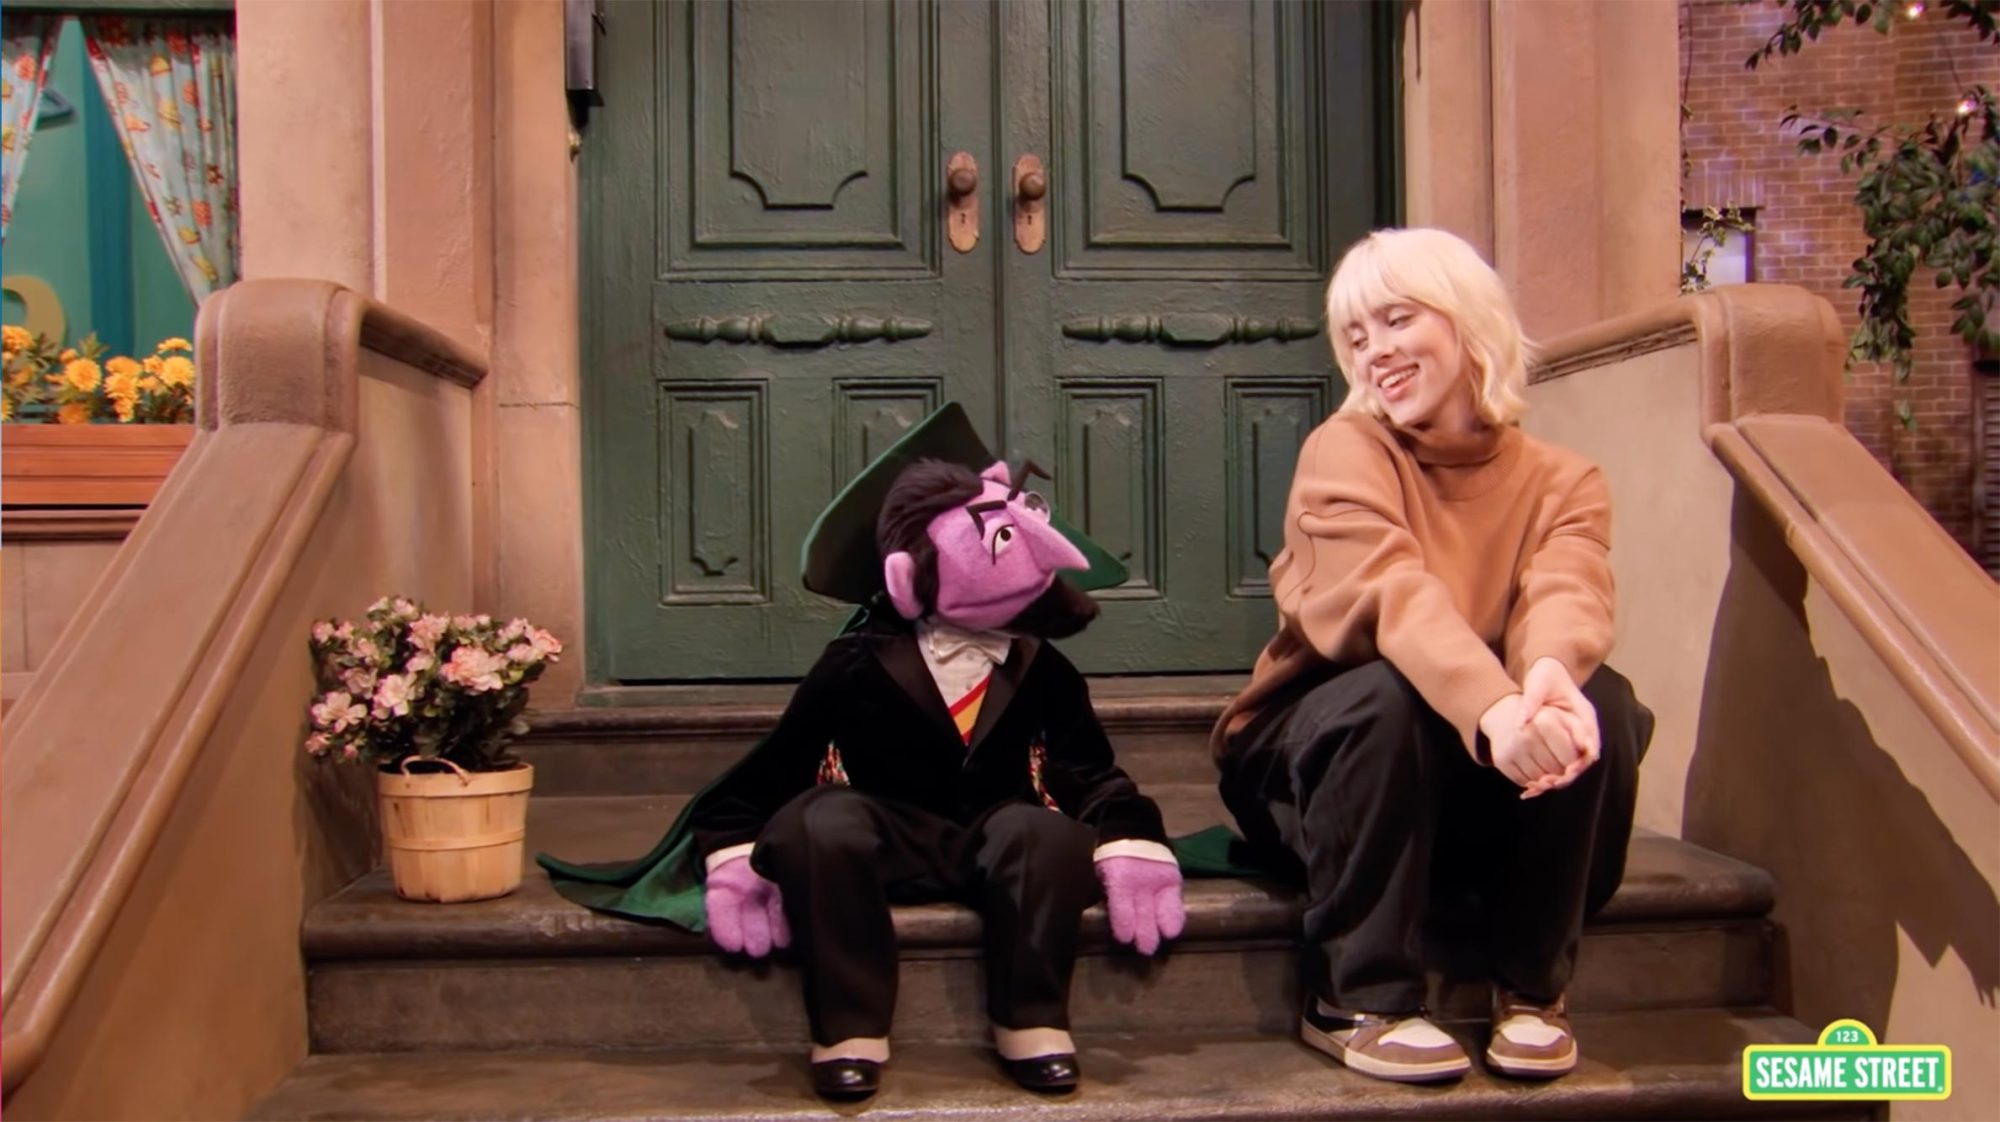 Sesame Street: Billie Eilish Sings ‘Happier Than Ever’ with The Count